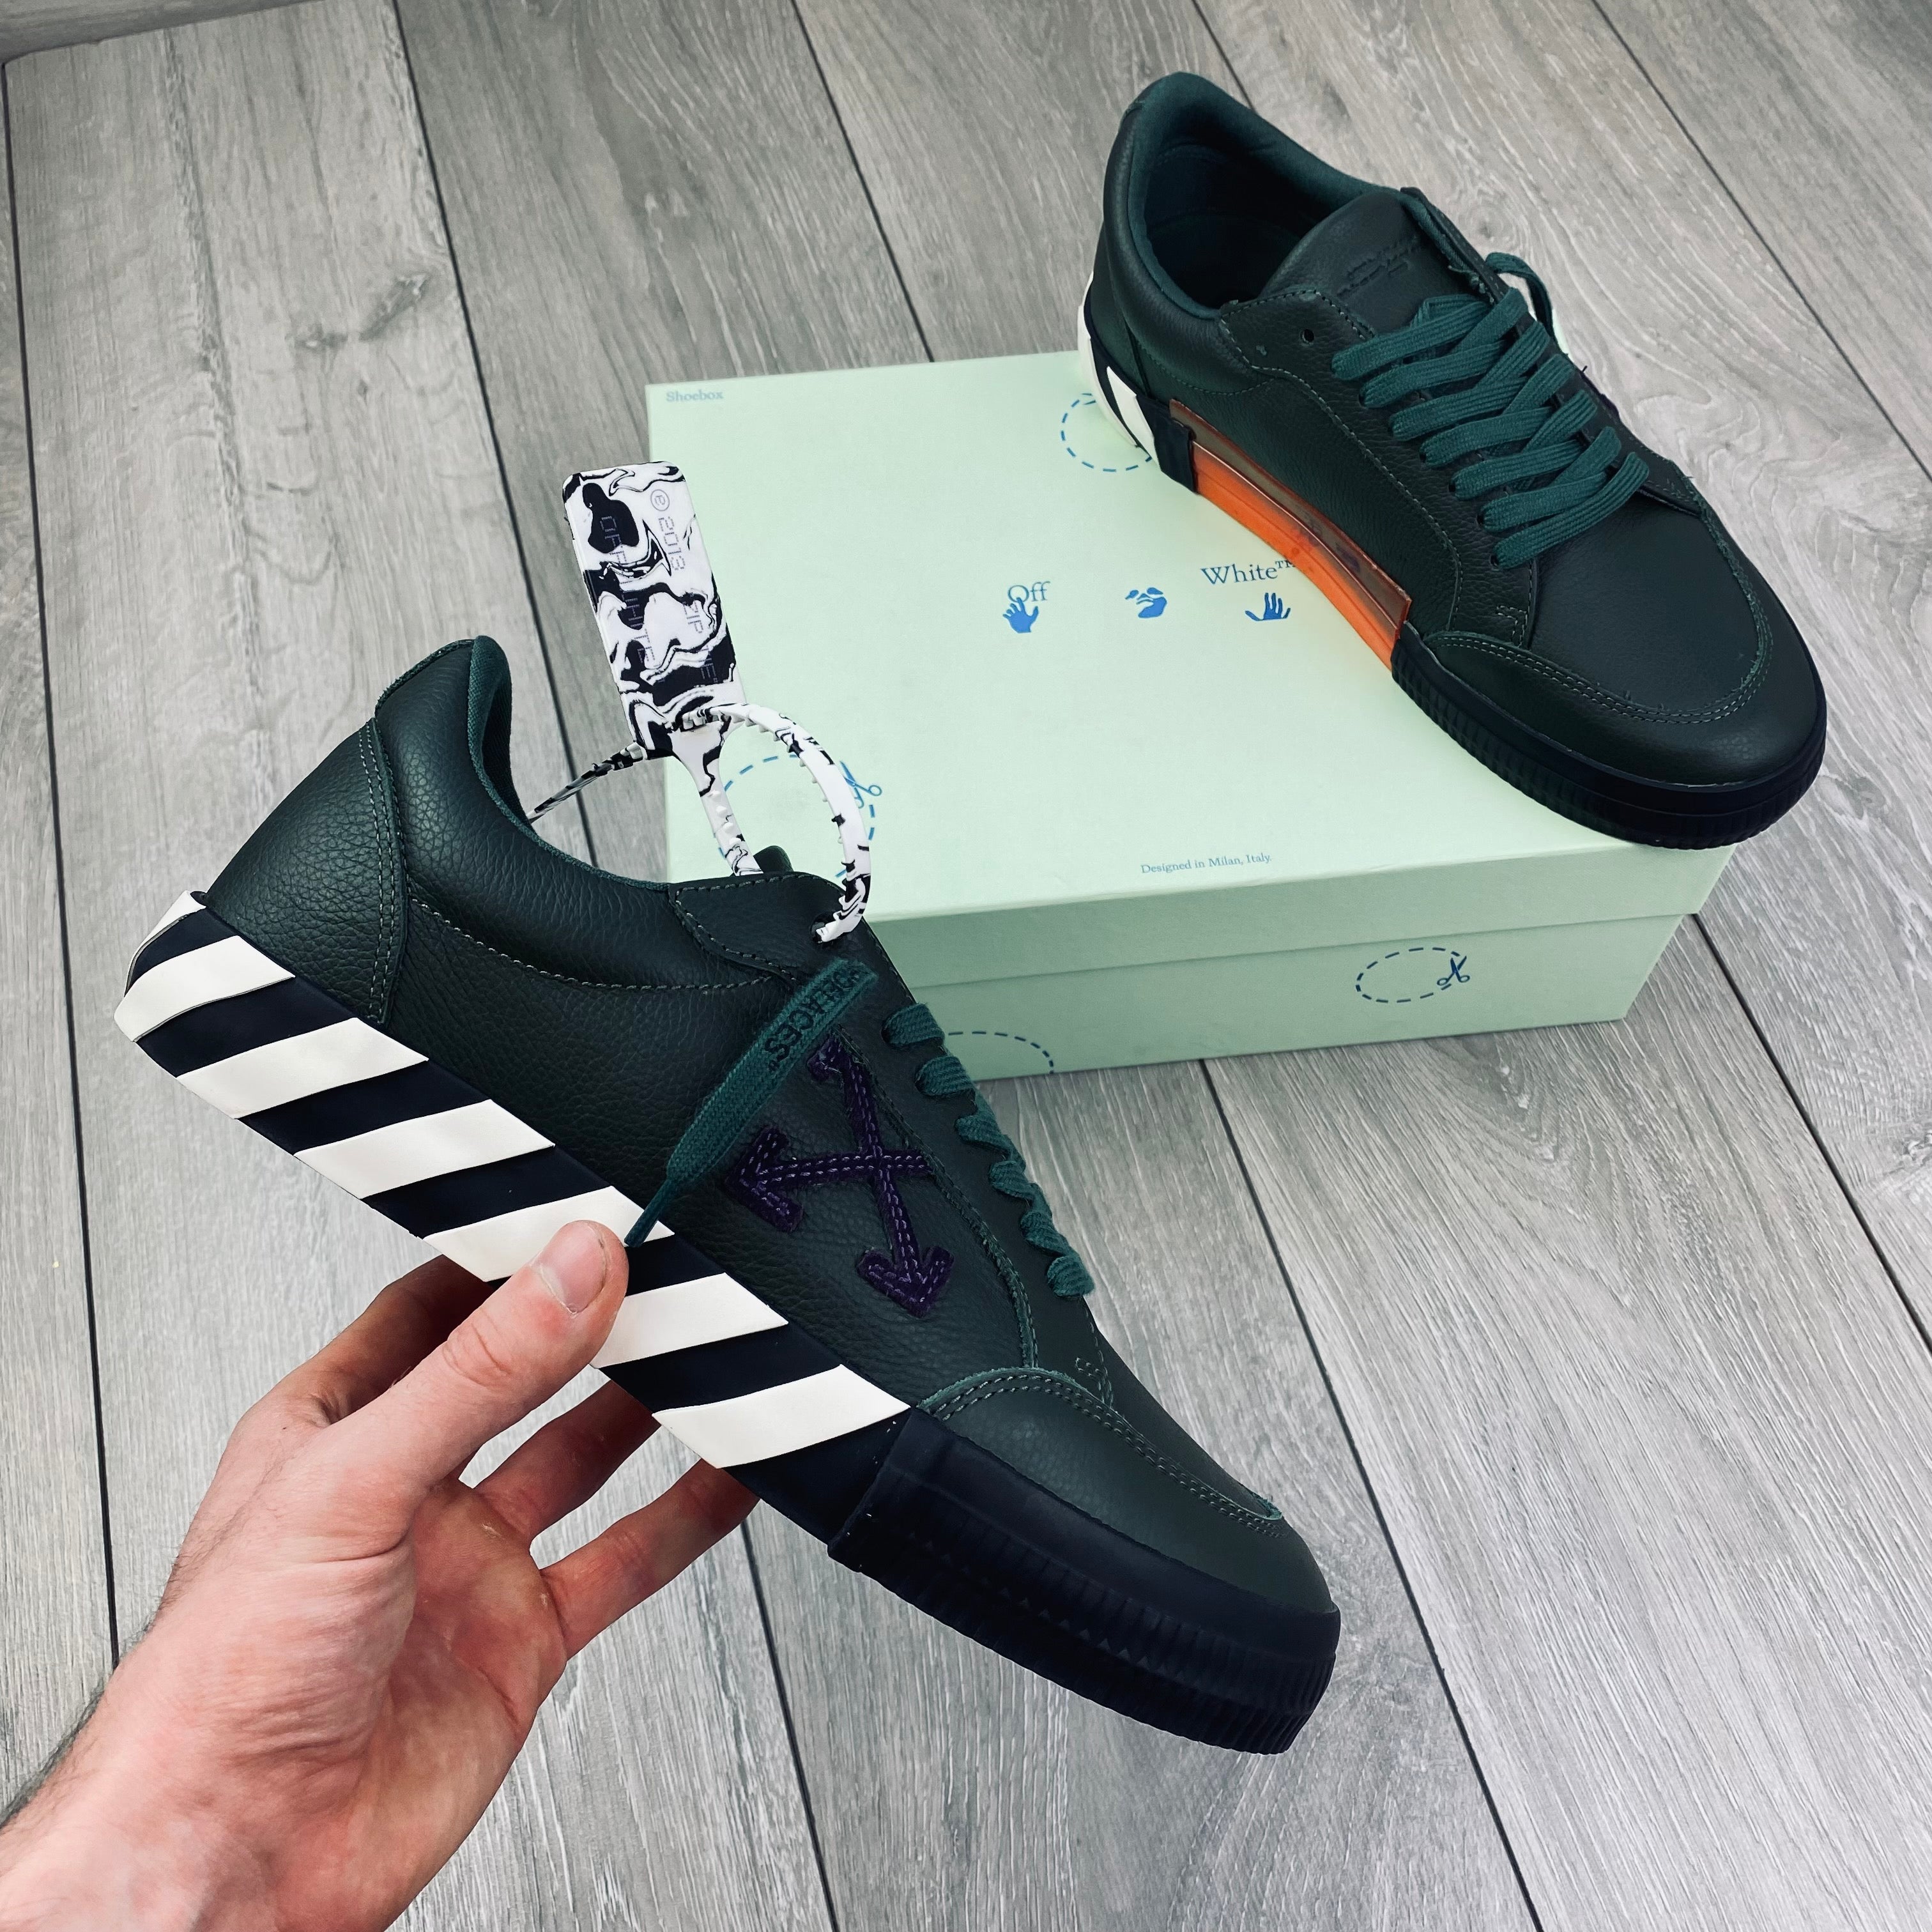 Off-White Leather Sneakers